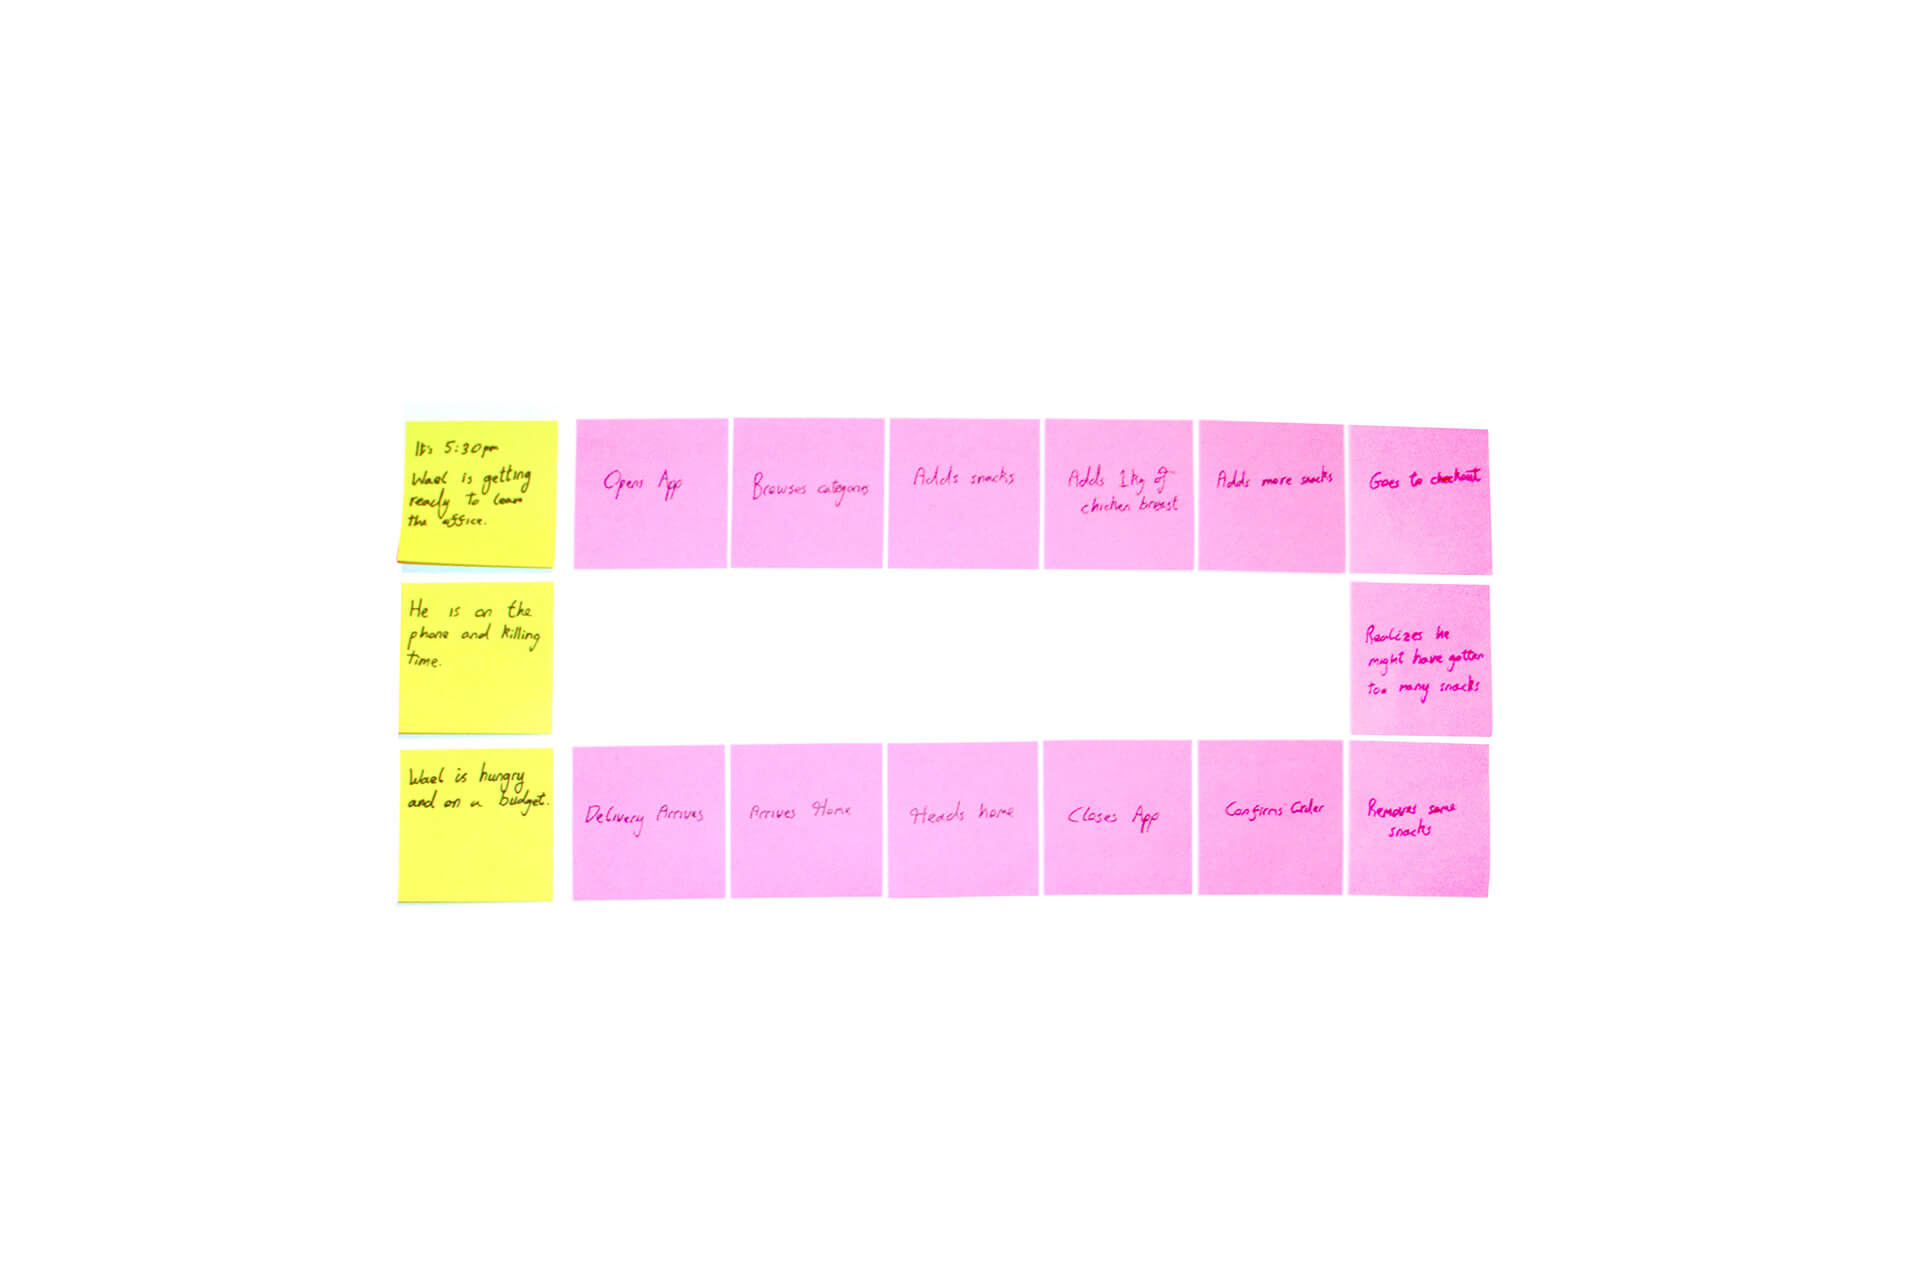 UX User Empathy Map for the Persona Wael